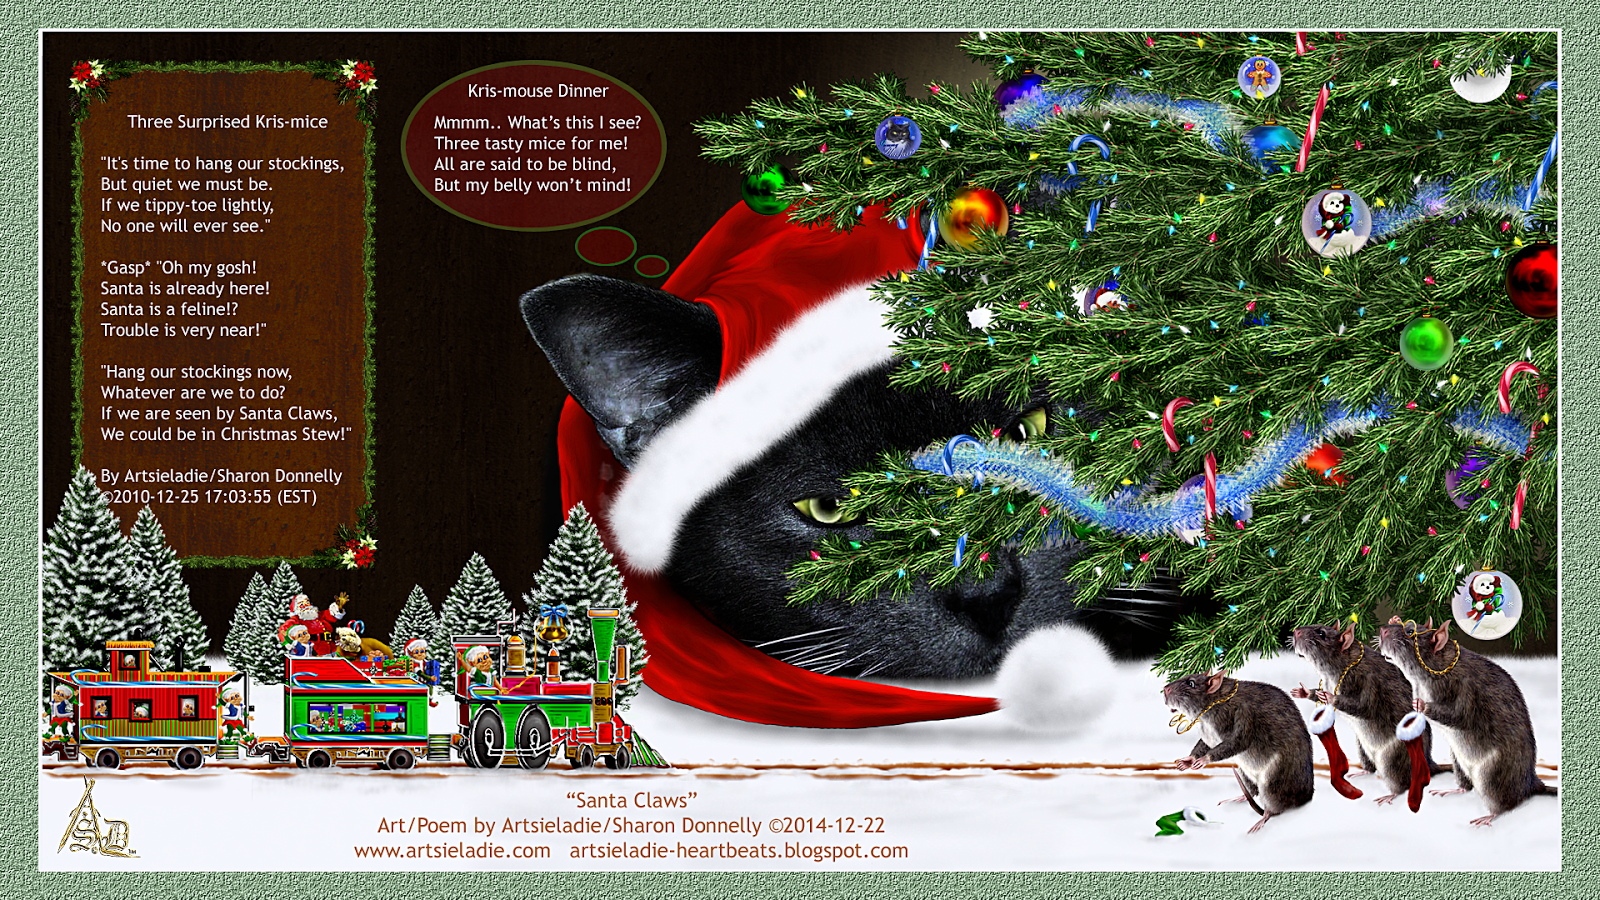 Christmas art/poems by/copyrighted to Artsieladie